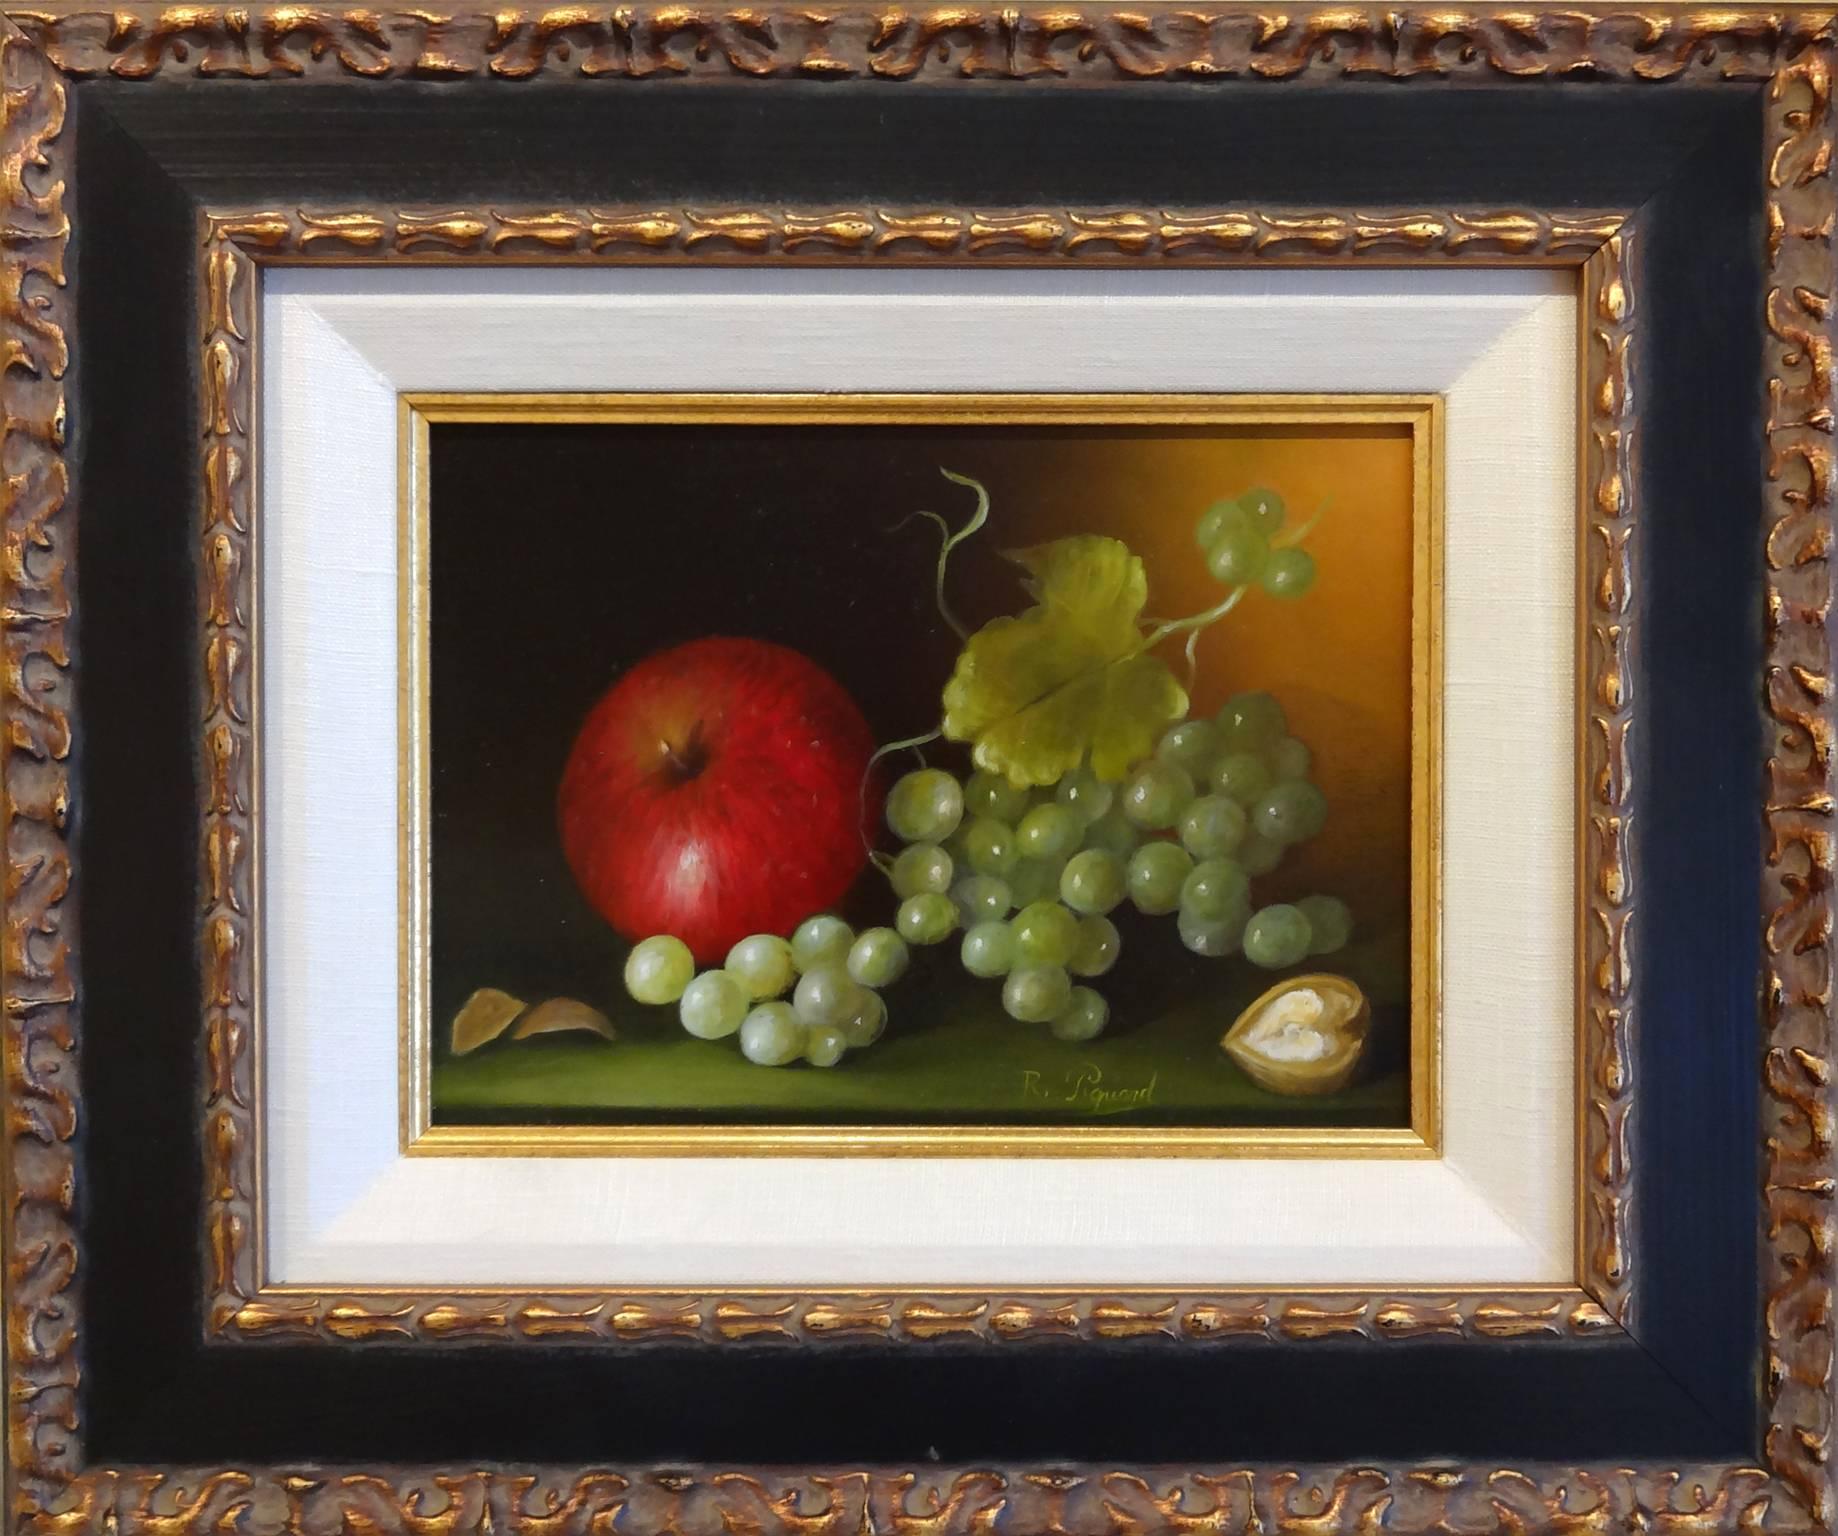 Fruit and Nuts (Fruits et Noix) - Painting by Robert Piquard